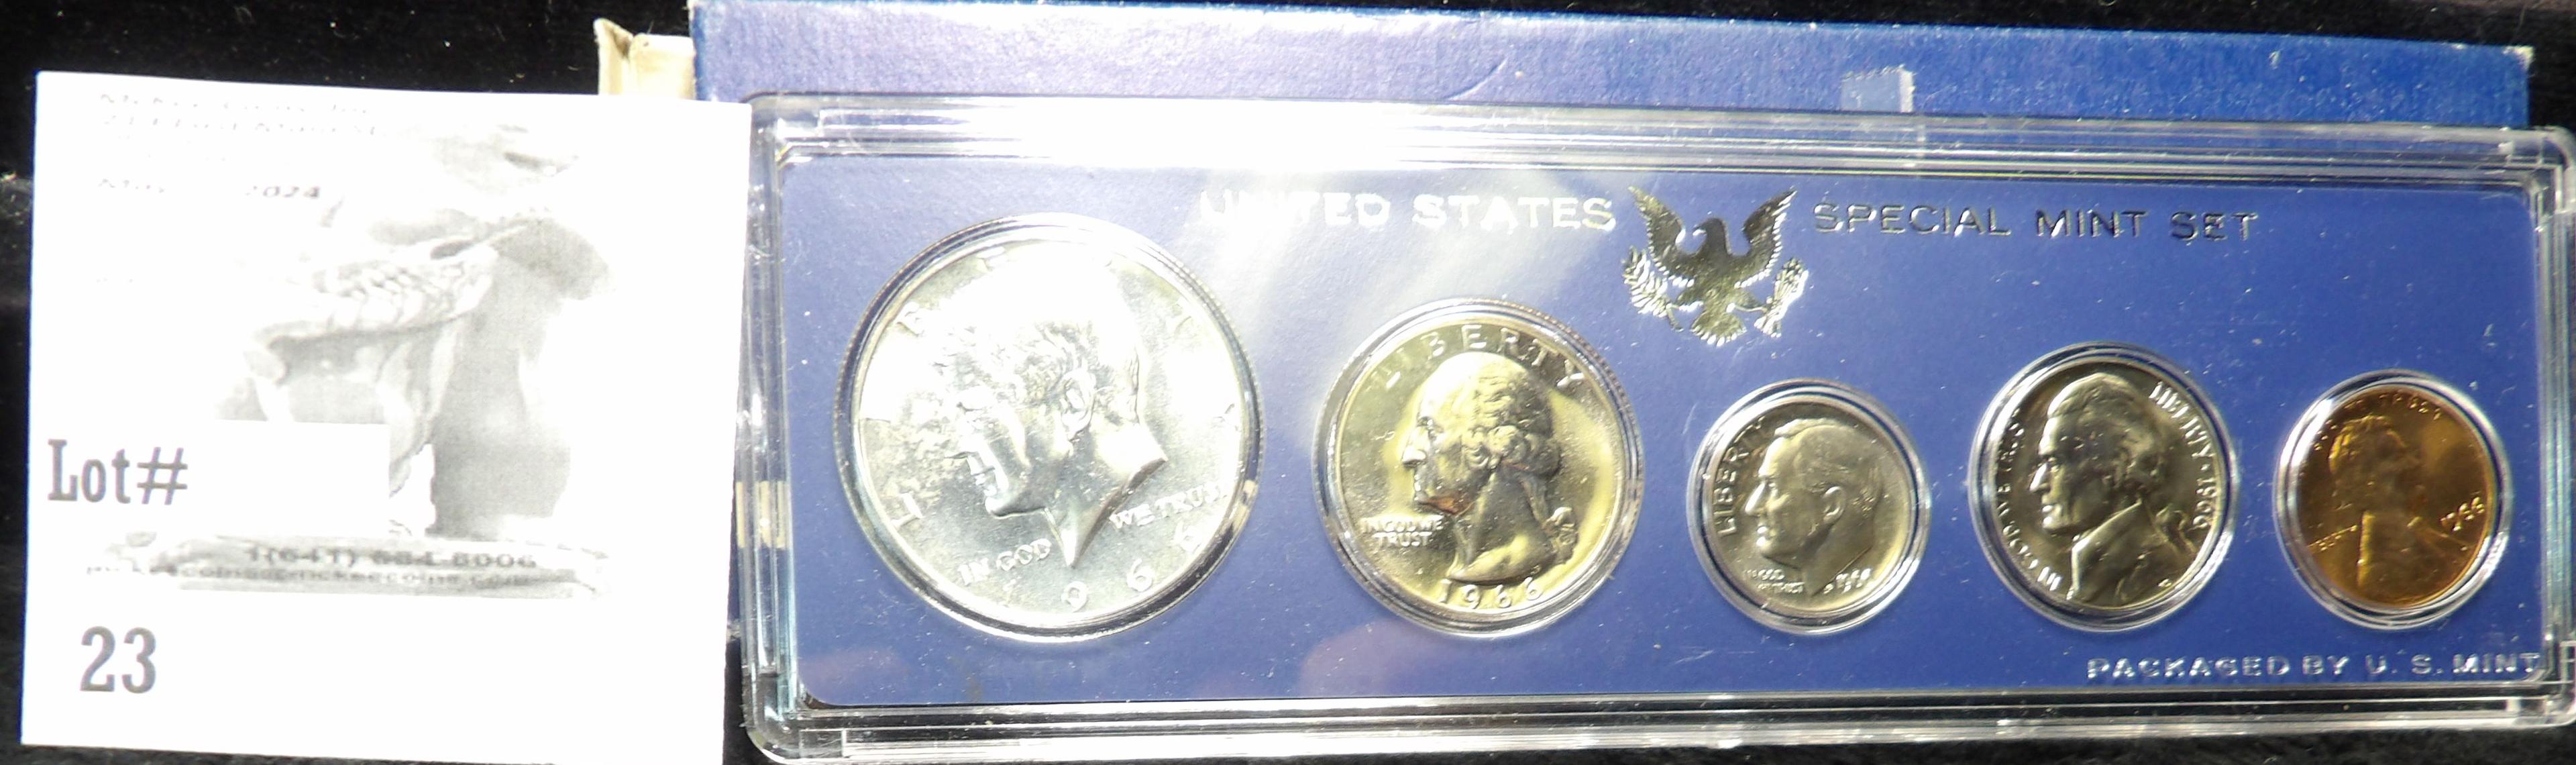 1966 U.S. Special Mint Set in original case and box of issue. Contains 40% Silver Half-dollar.